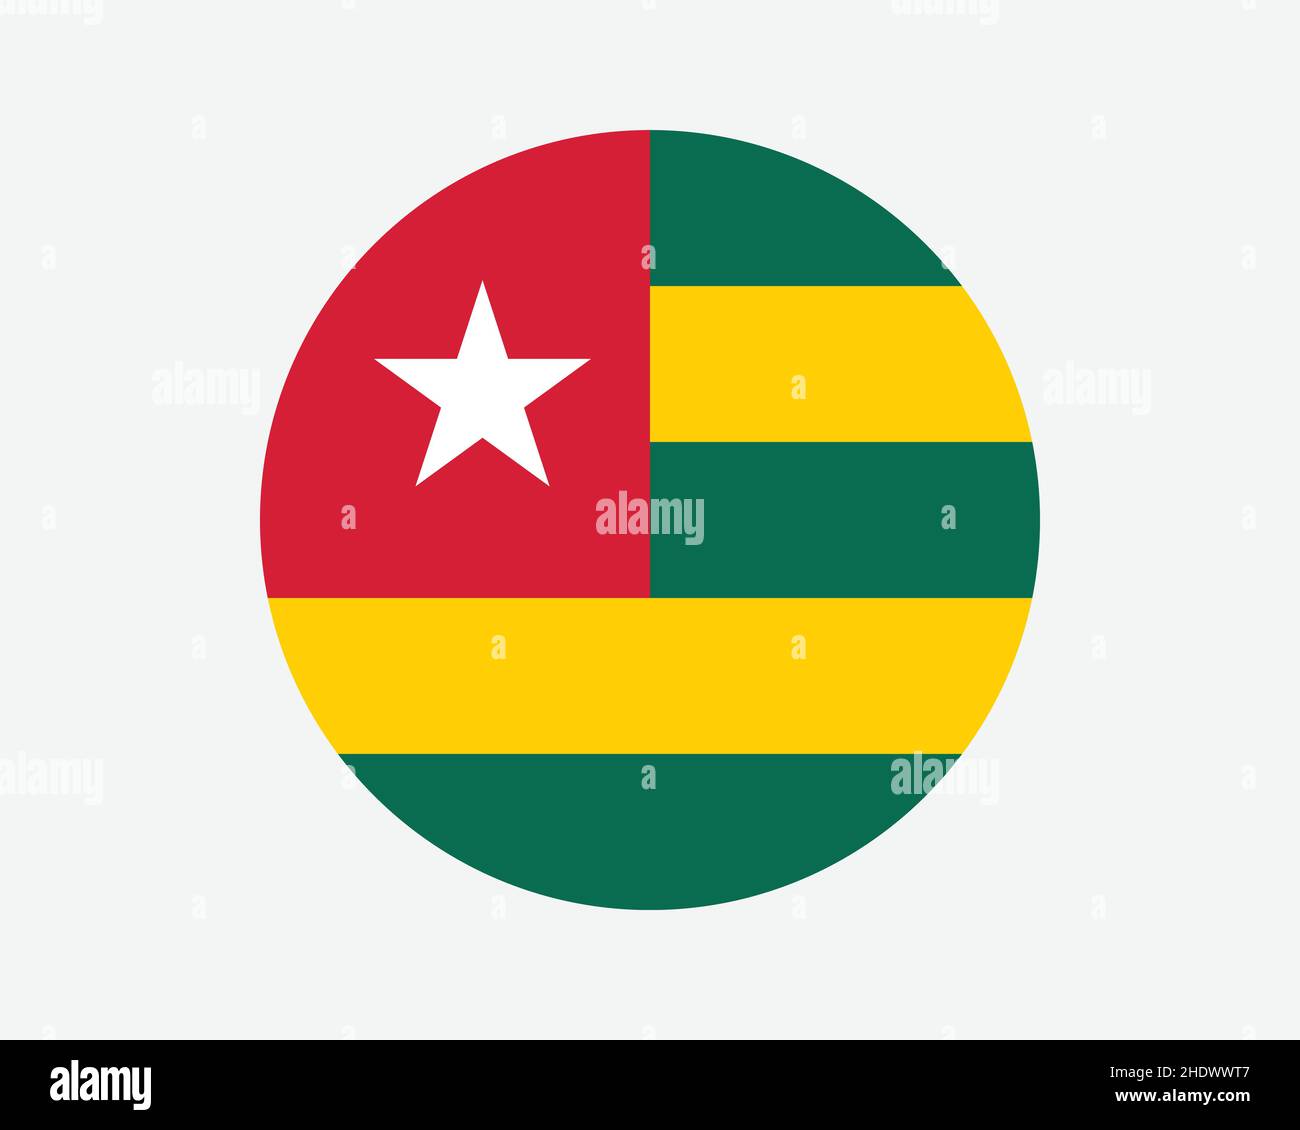 Togo Round Country Flag. Togolese Circle National Flag. Togolese Republic Circular Shape Button Banner. EPS Vector Illustration. Stock Vector